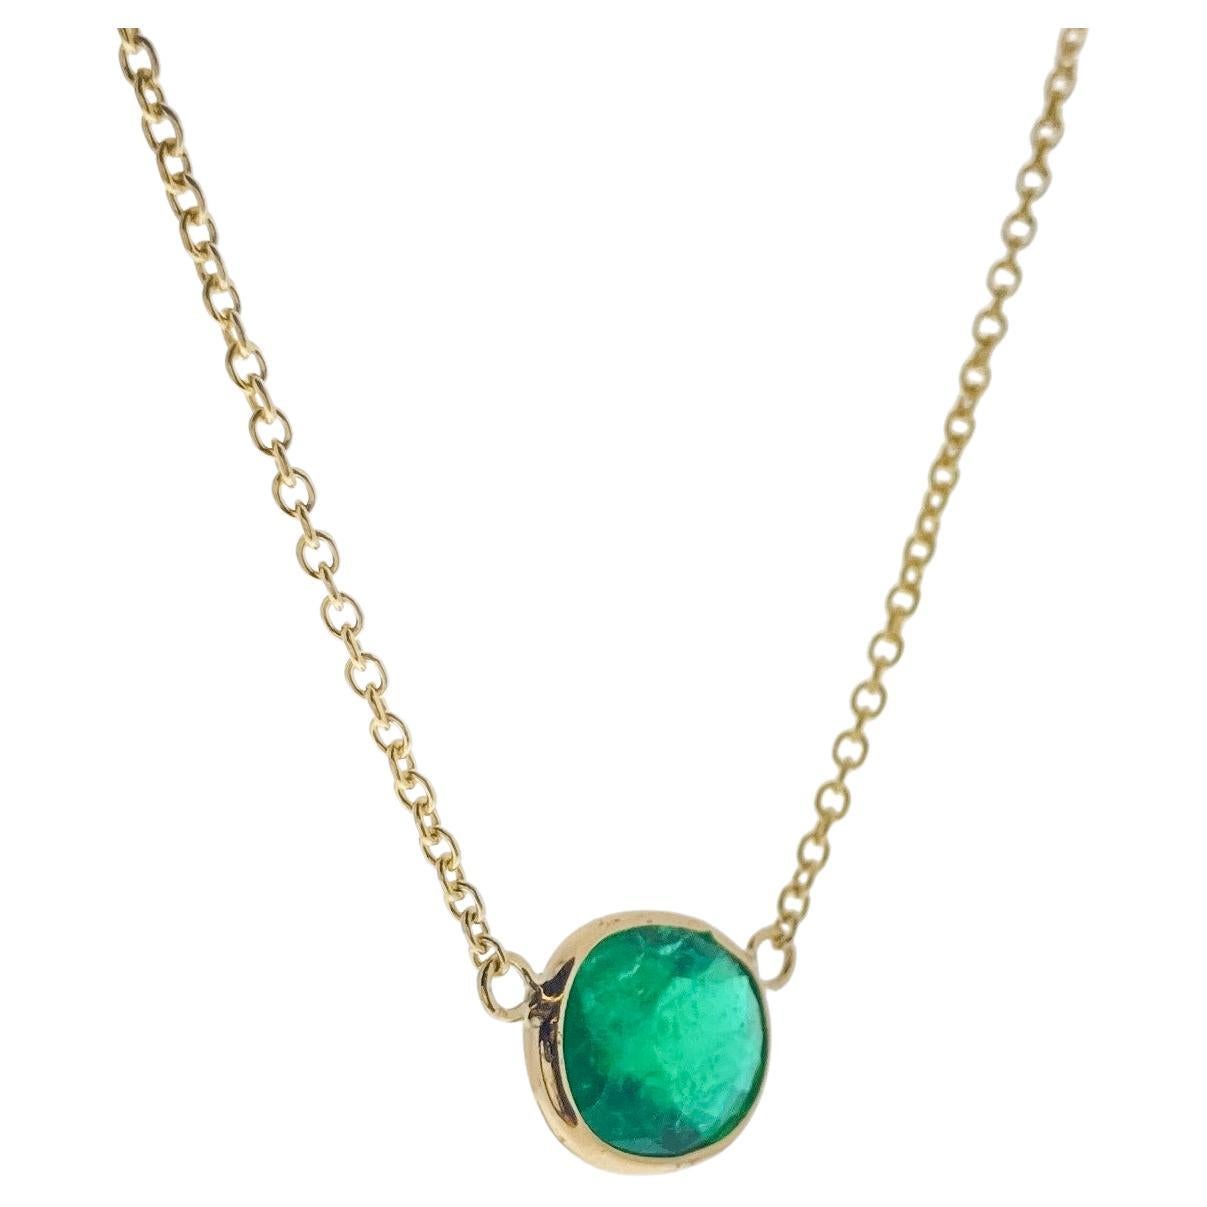 1.65 Carat Green Emerald Oval Cut Fashion Necklaces In 14K Yellow Gold